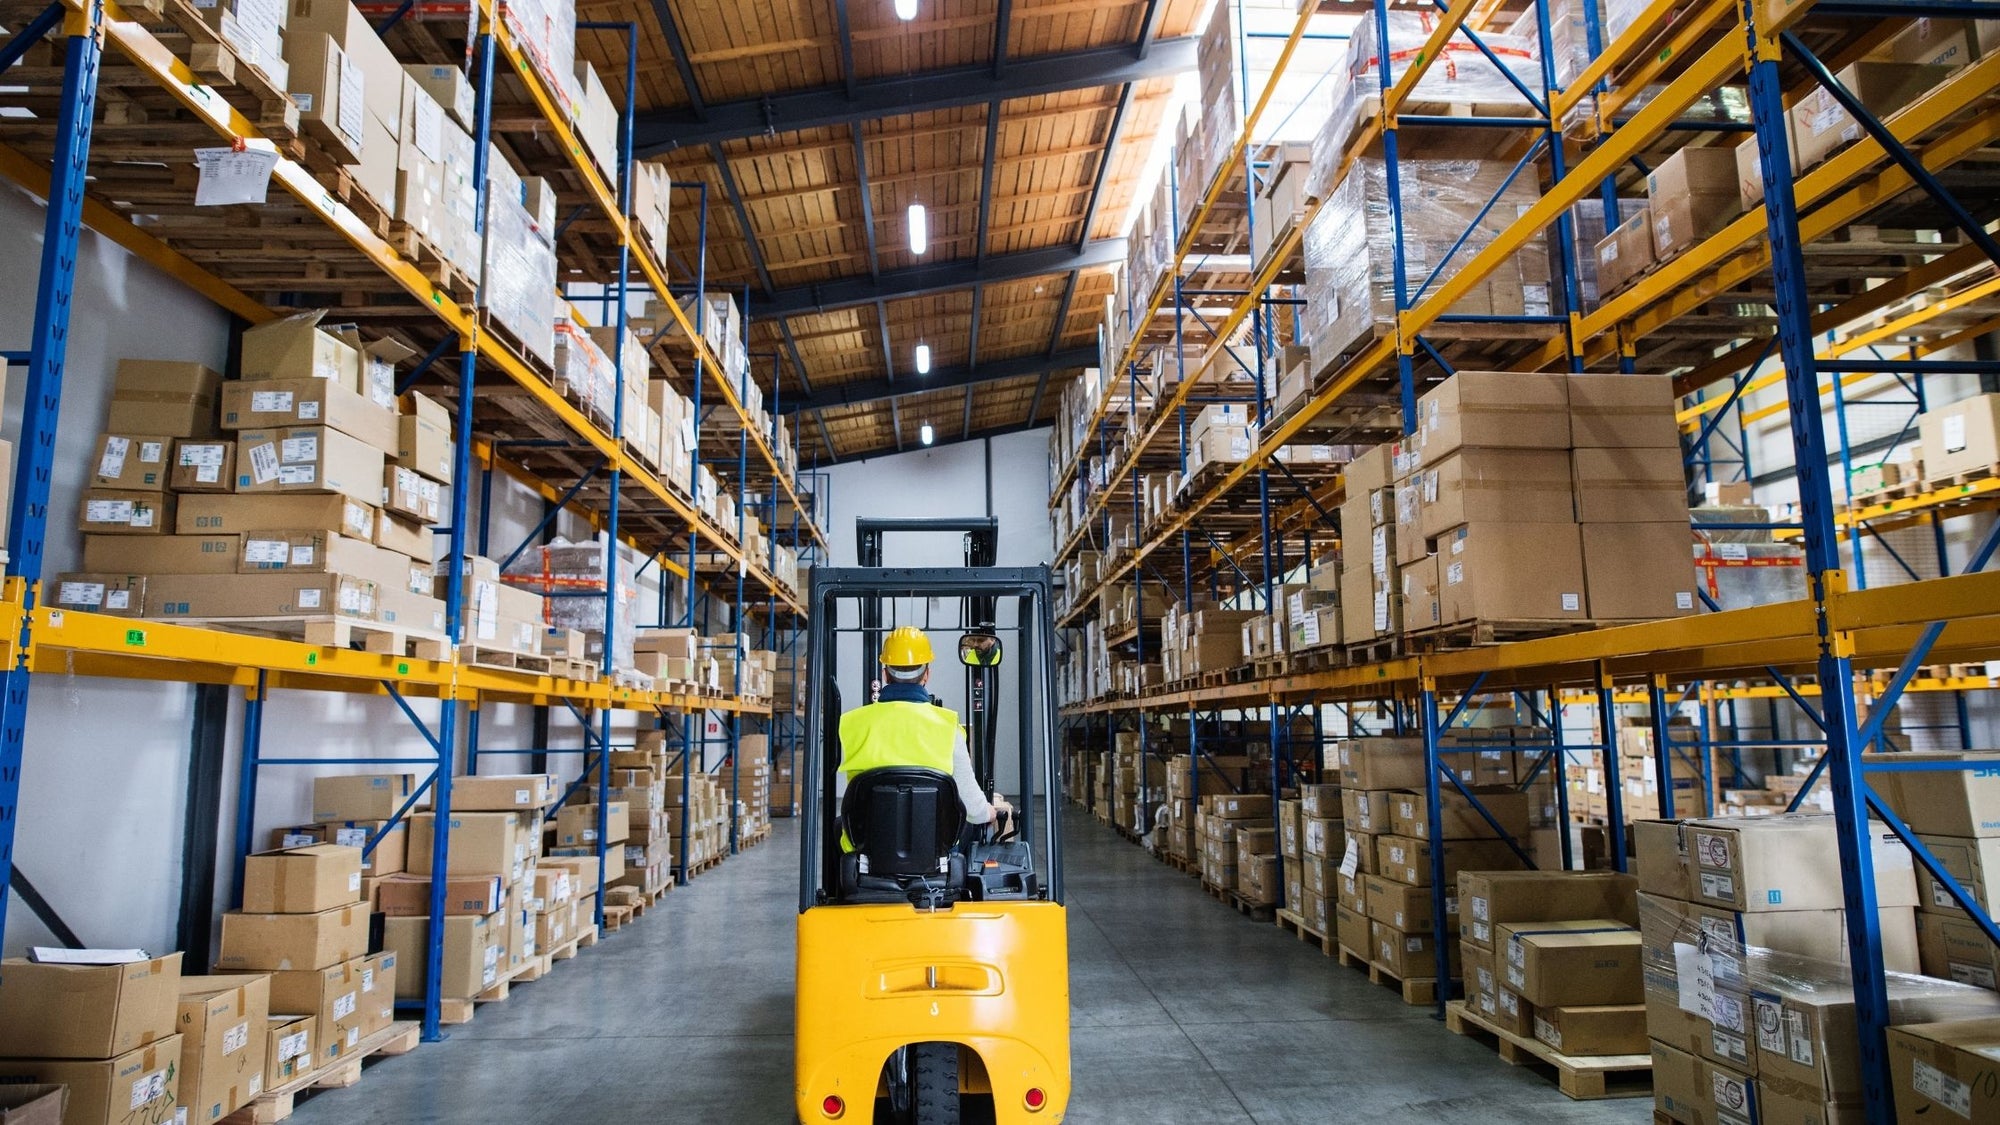 Why We Work With Cin7 for Inventory Management